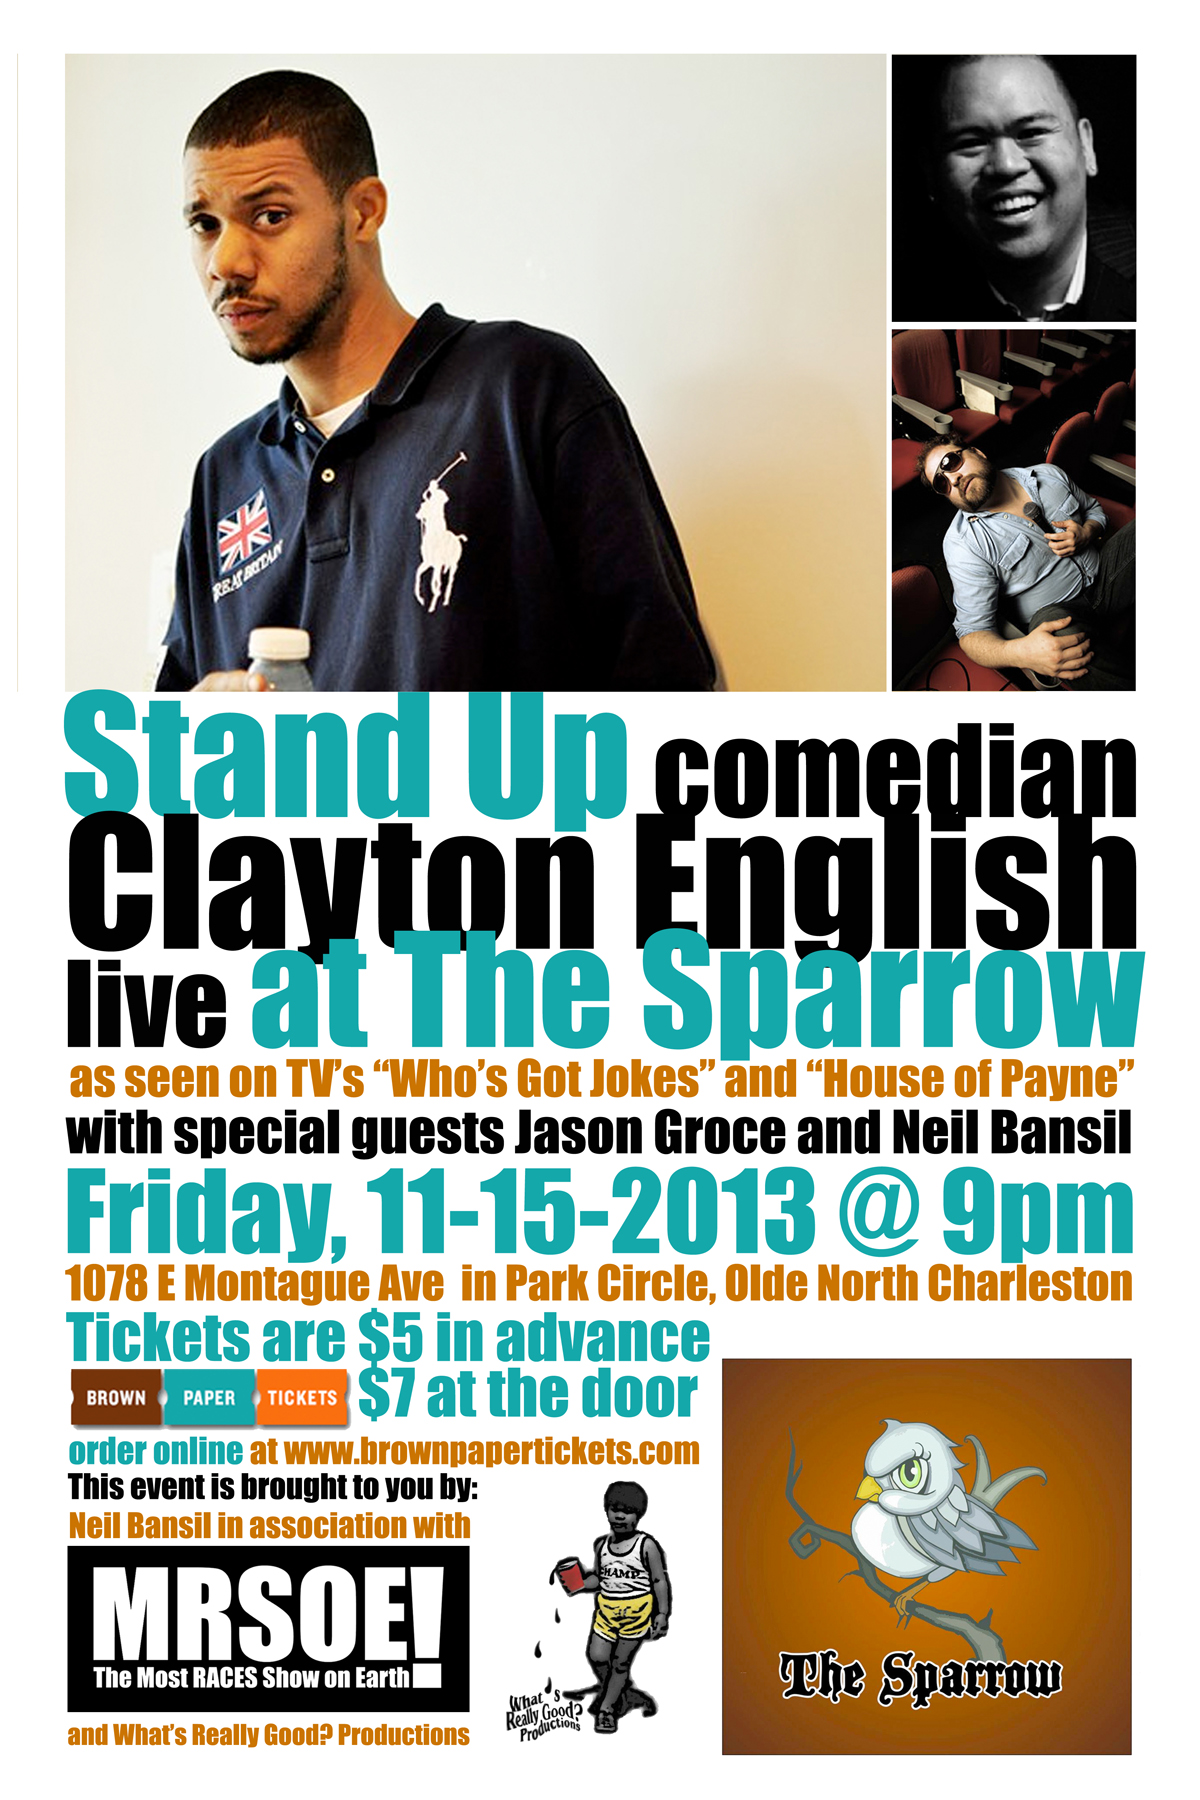 Stand-Up at The Sparrow - Park Circle - featuring Clayton English